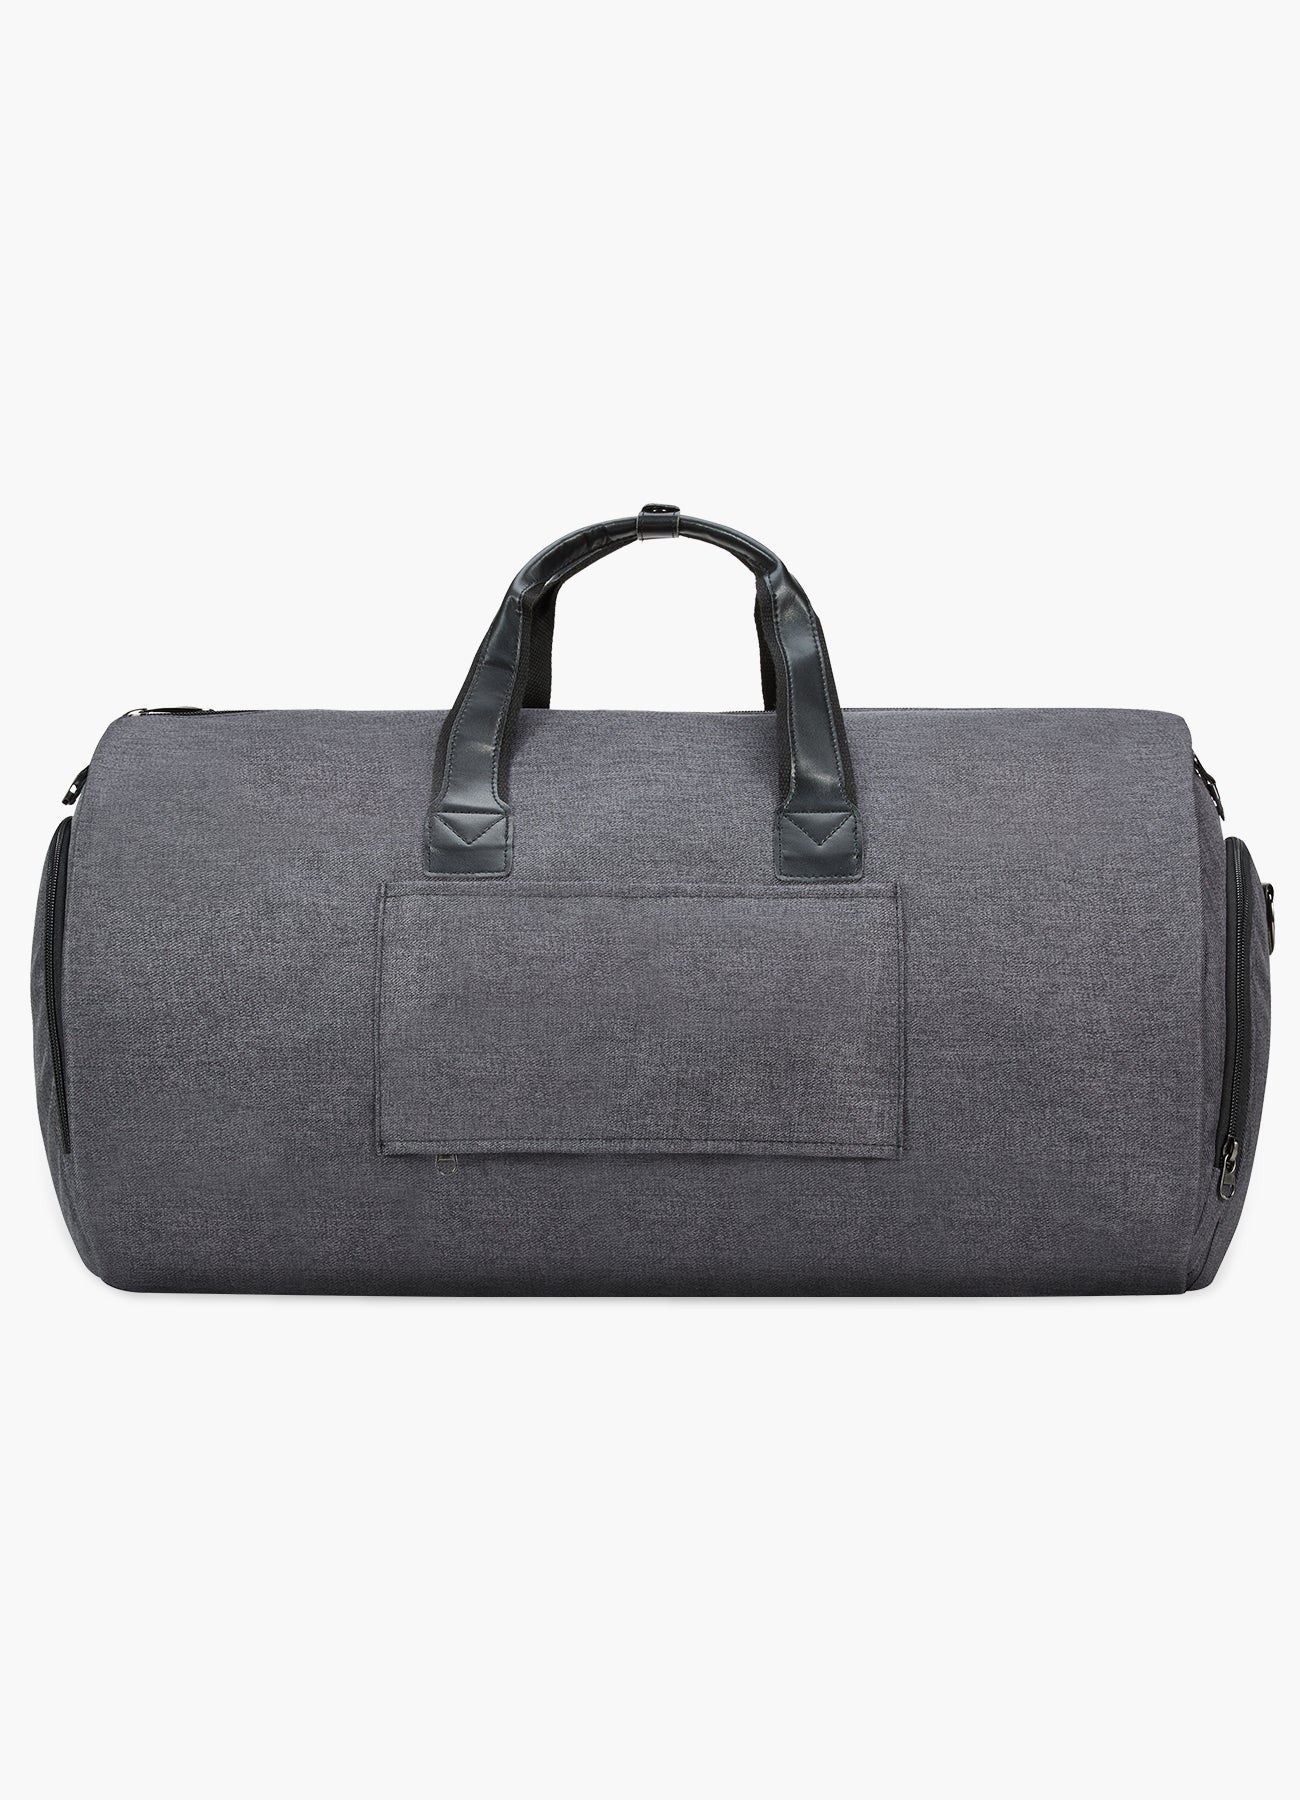 2 in 1 Canvas Leather Suit Luggage Garment Bag with